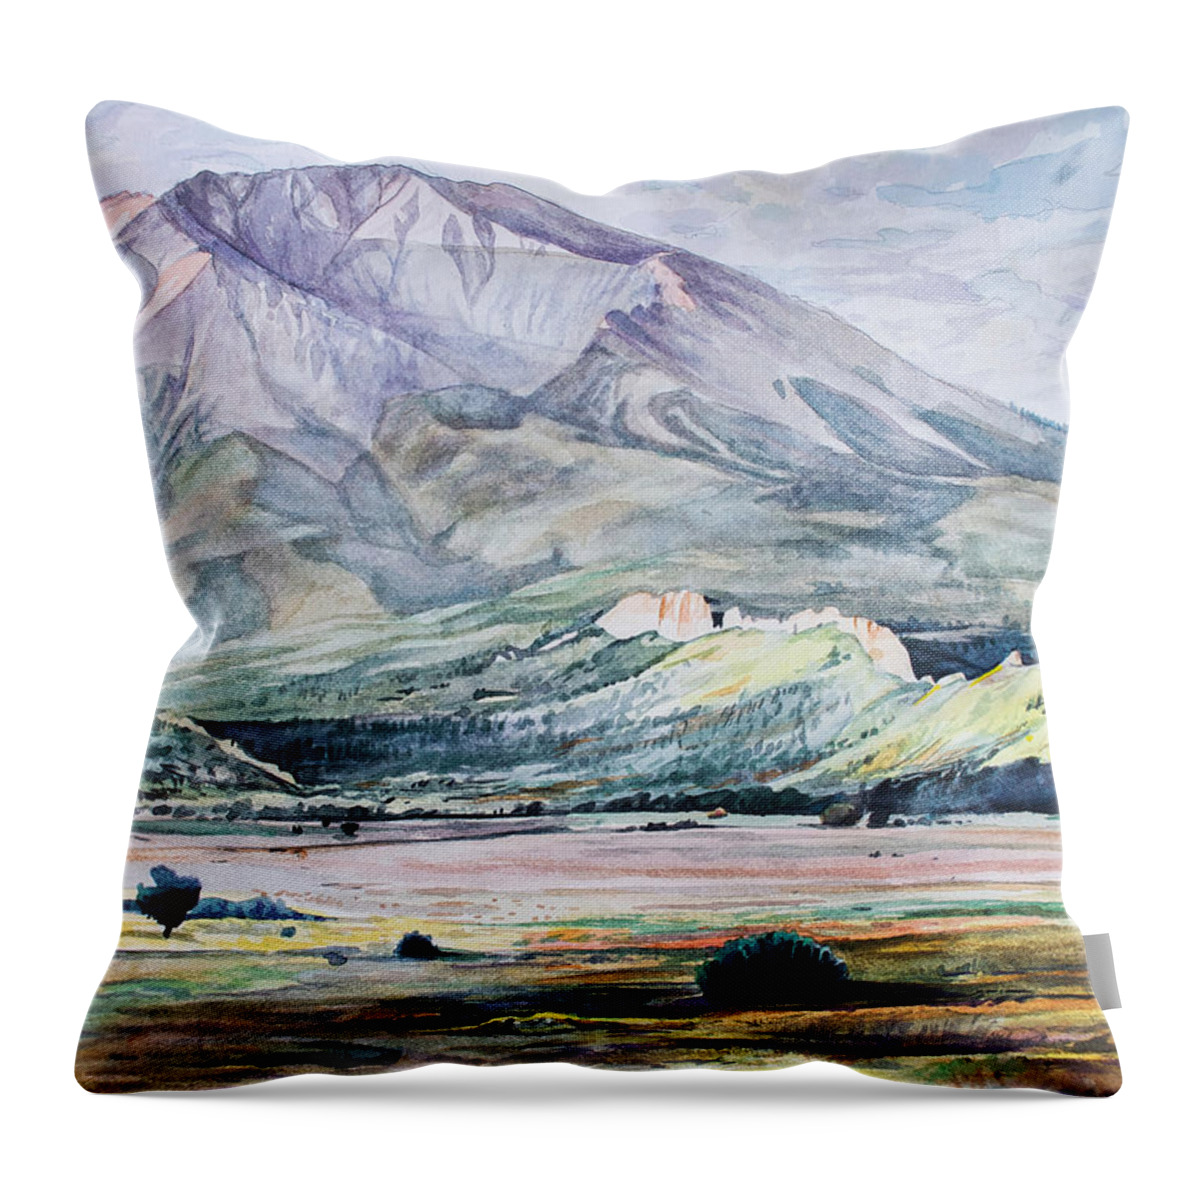 West Spanish Peak Throw Pillow featuring the painting West Spanish Peak by Aaron Spong